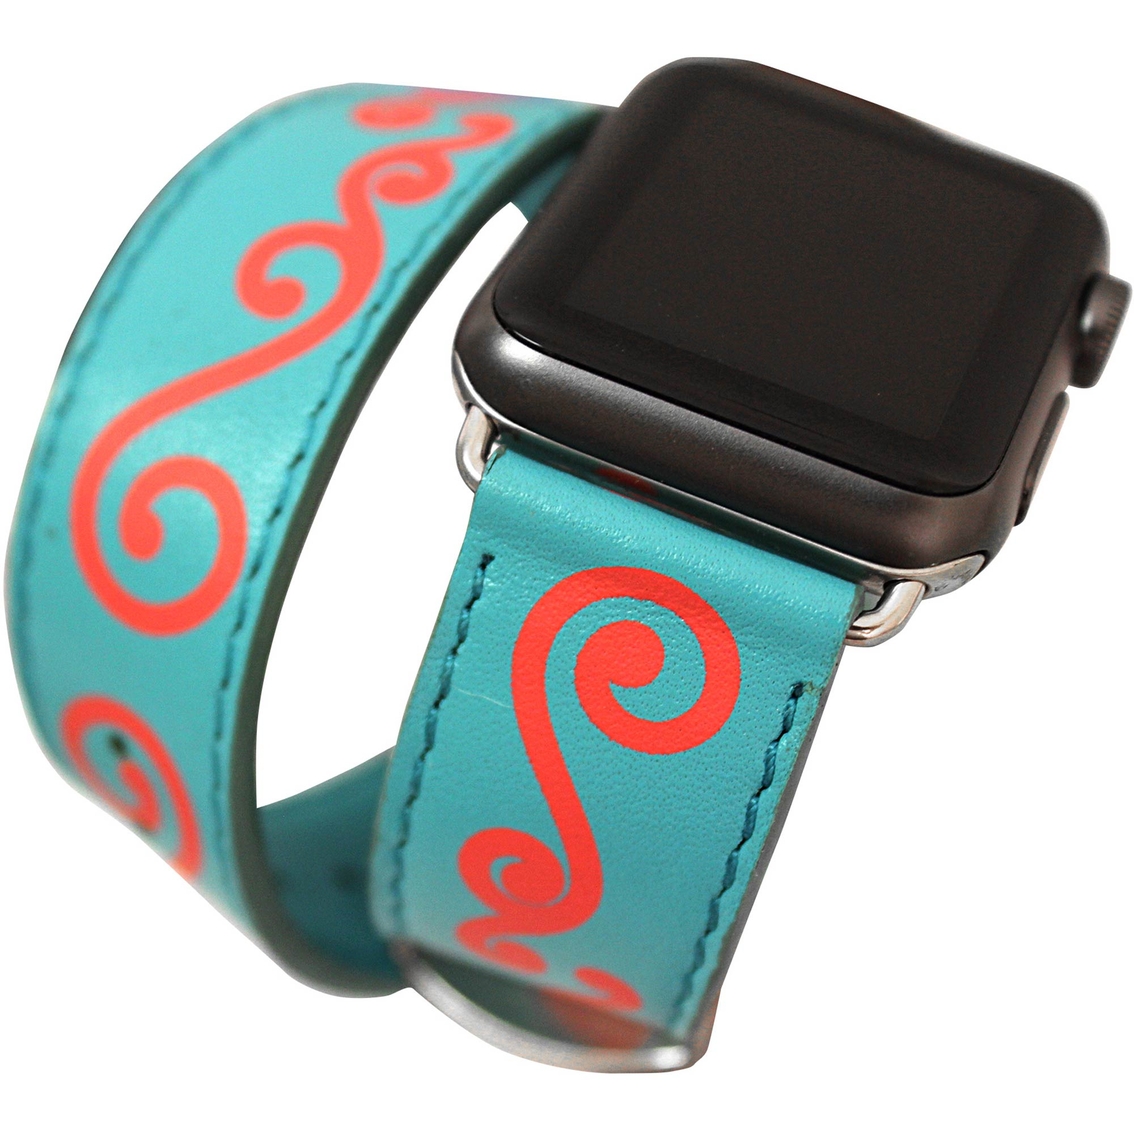 iBand Pro Teal Leather Pink Swirl Watchband for Apple Watches - Image 3 of 3